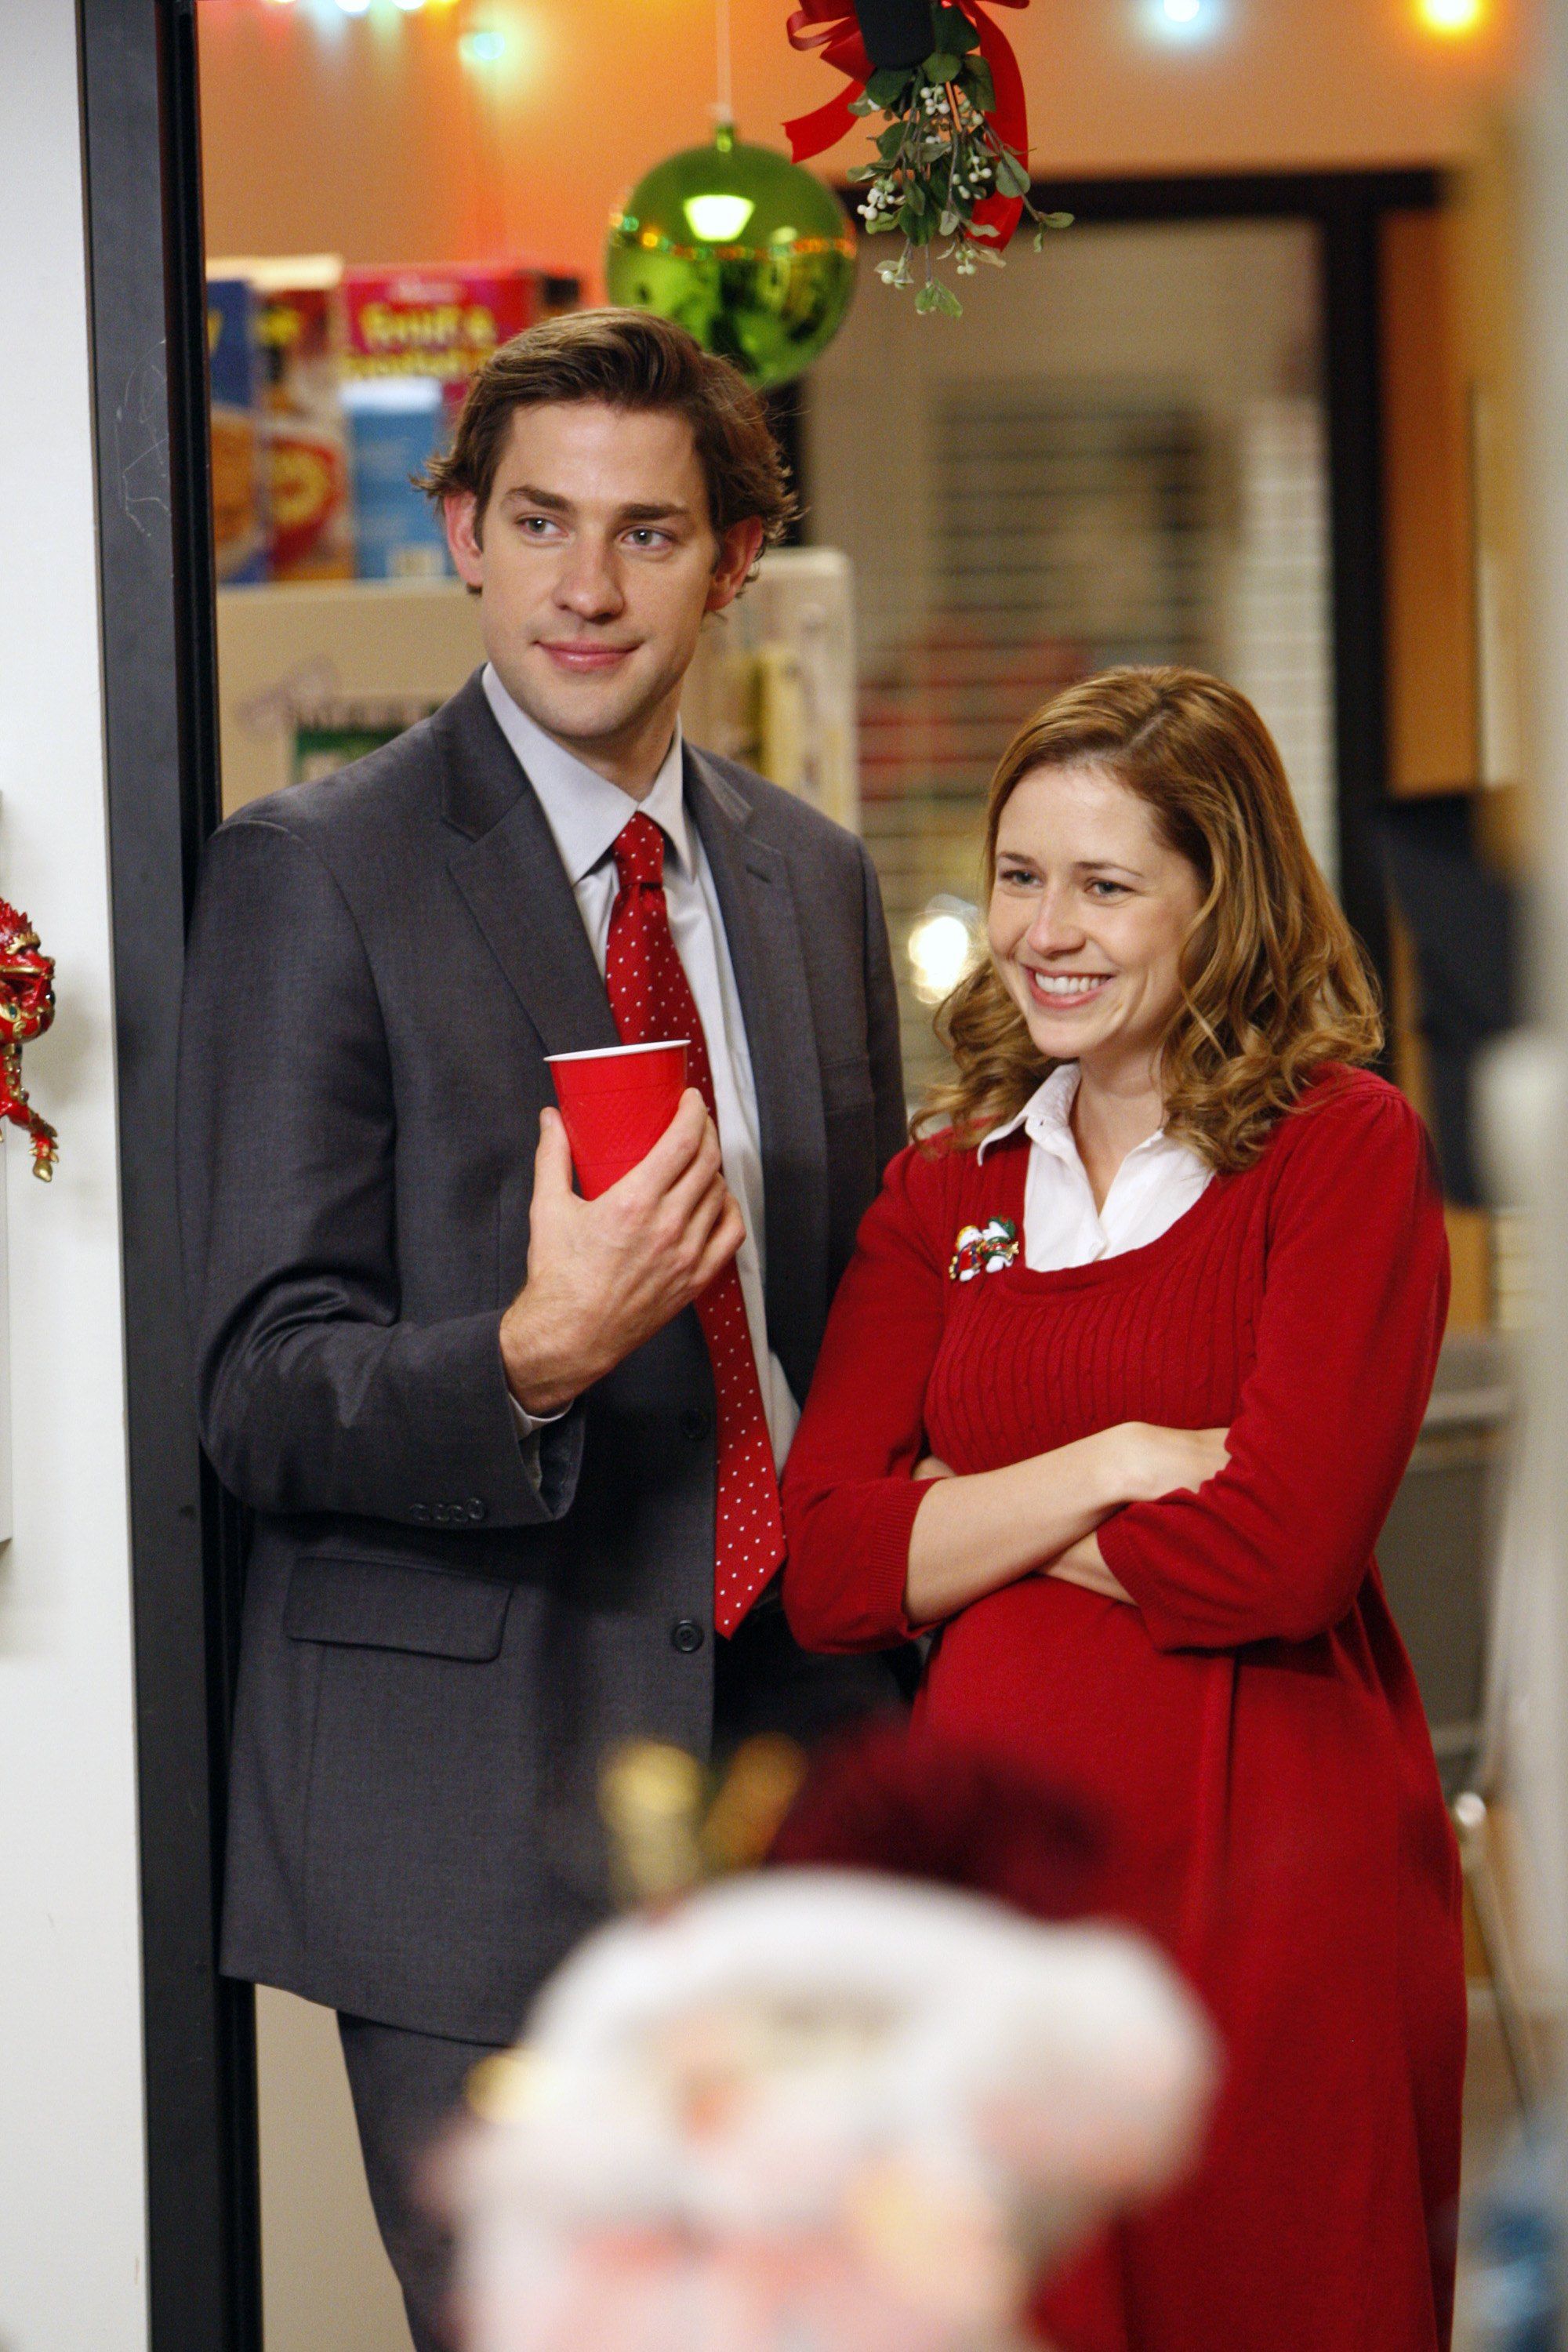 The Office' Christmas Episodes on Netflix, Ranked From Worst to Best